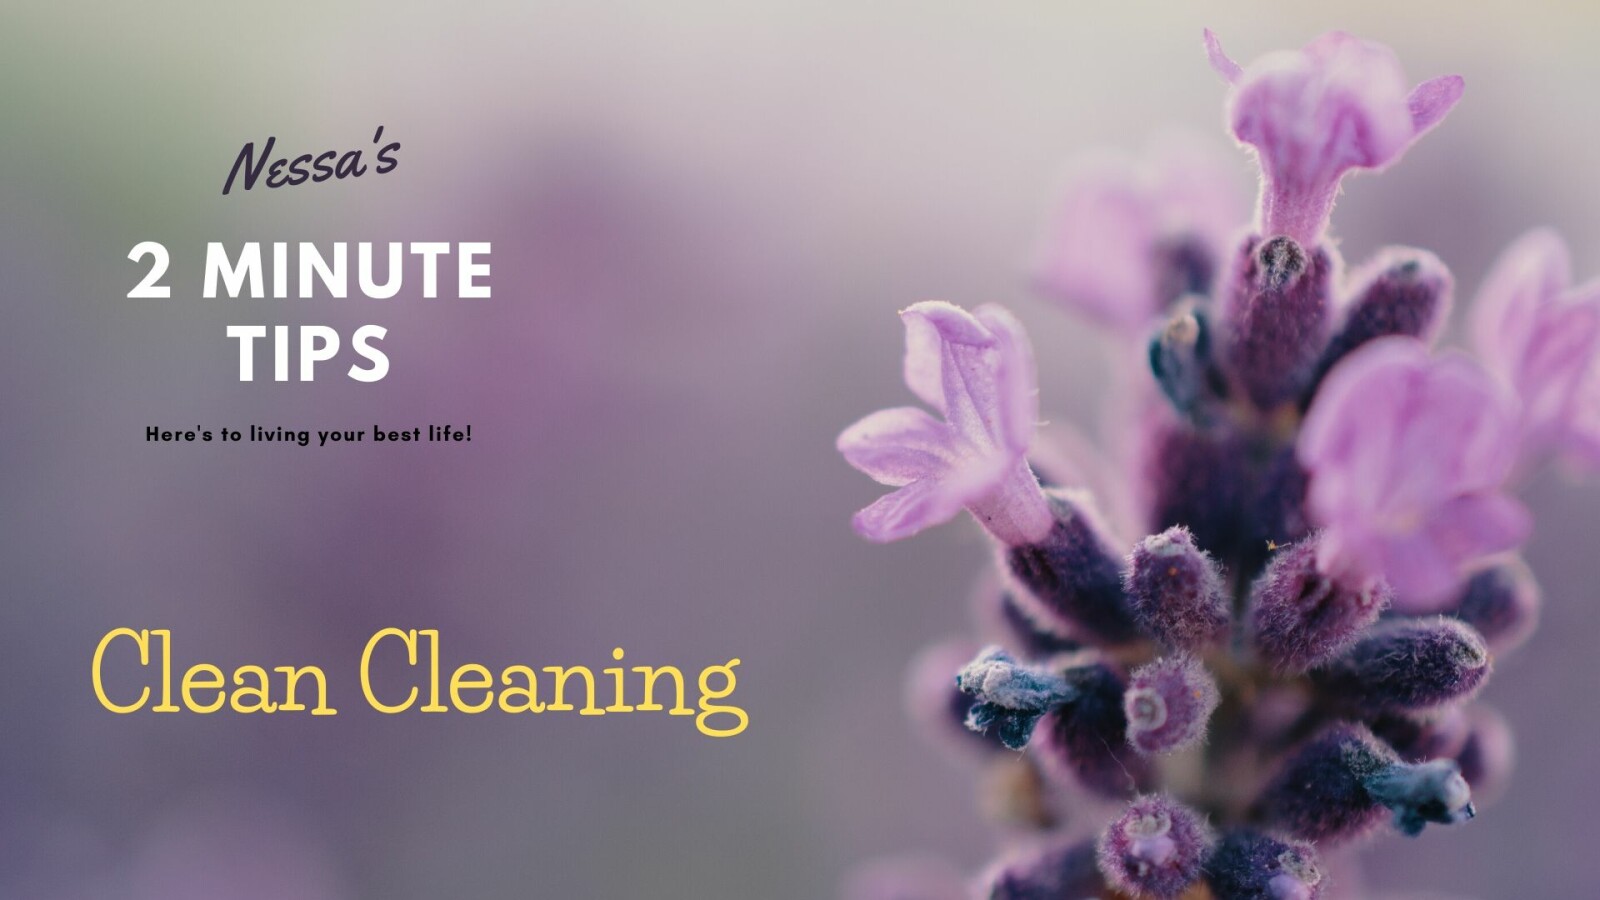 Clean Cleaning - Natural ways to clean your home without the nasty side effects of chemical cleaners